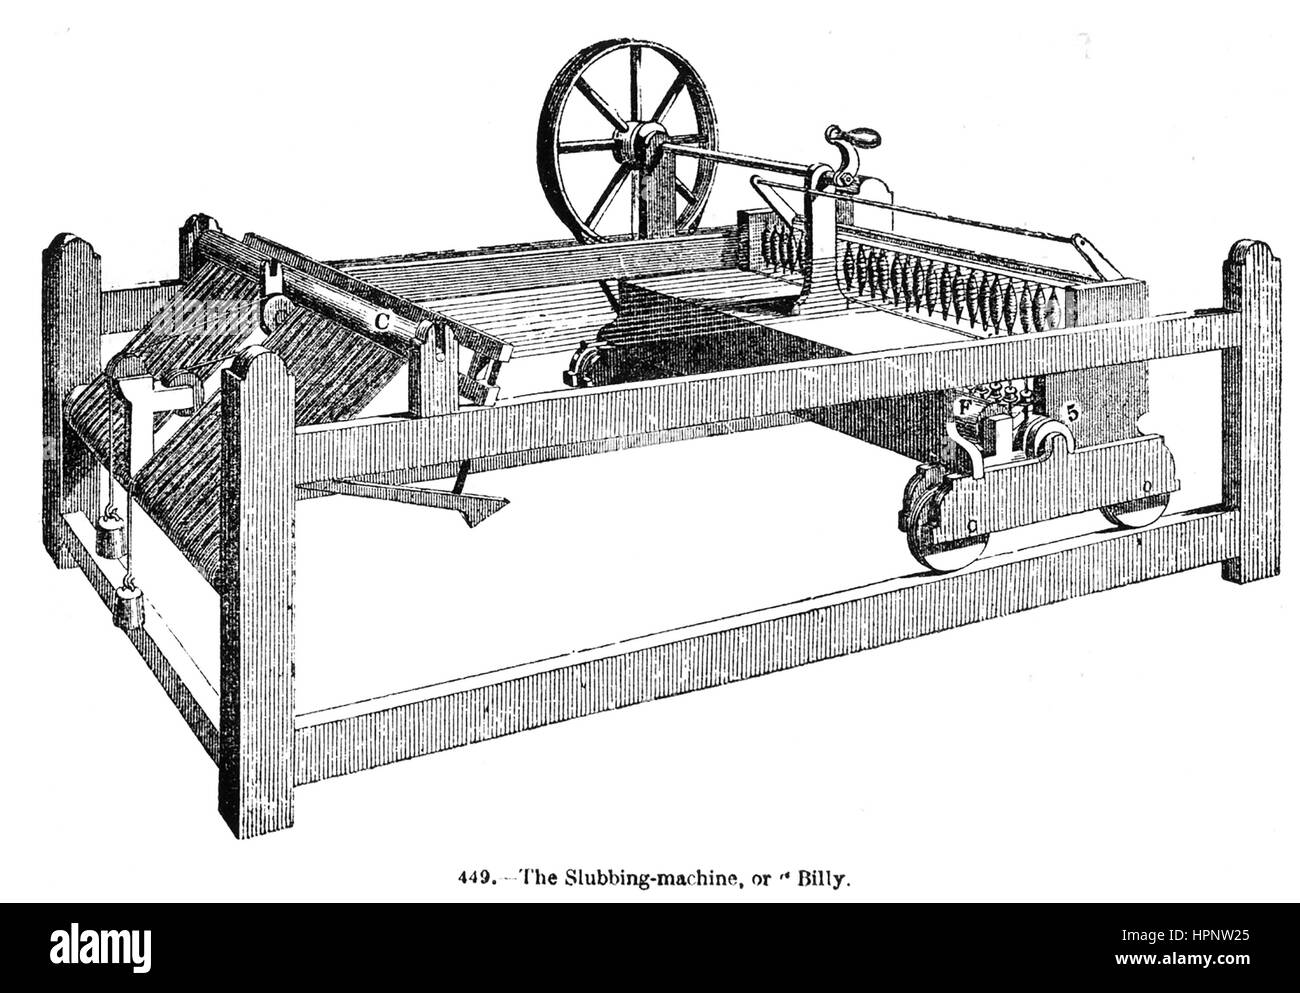 STUBBING MACHINE or Stubbing Billy. It joined the carded lengths of wool and twists them onto a series of spindles. This was often a job for children according to the Penny Magazine of November 1843. Stock Photo